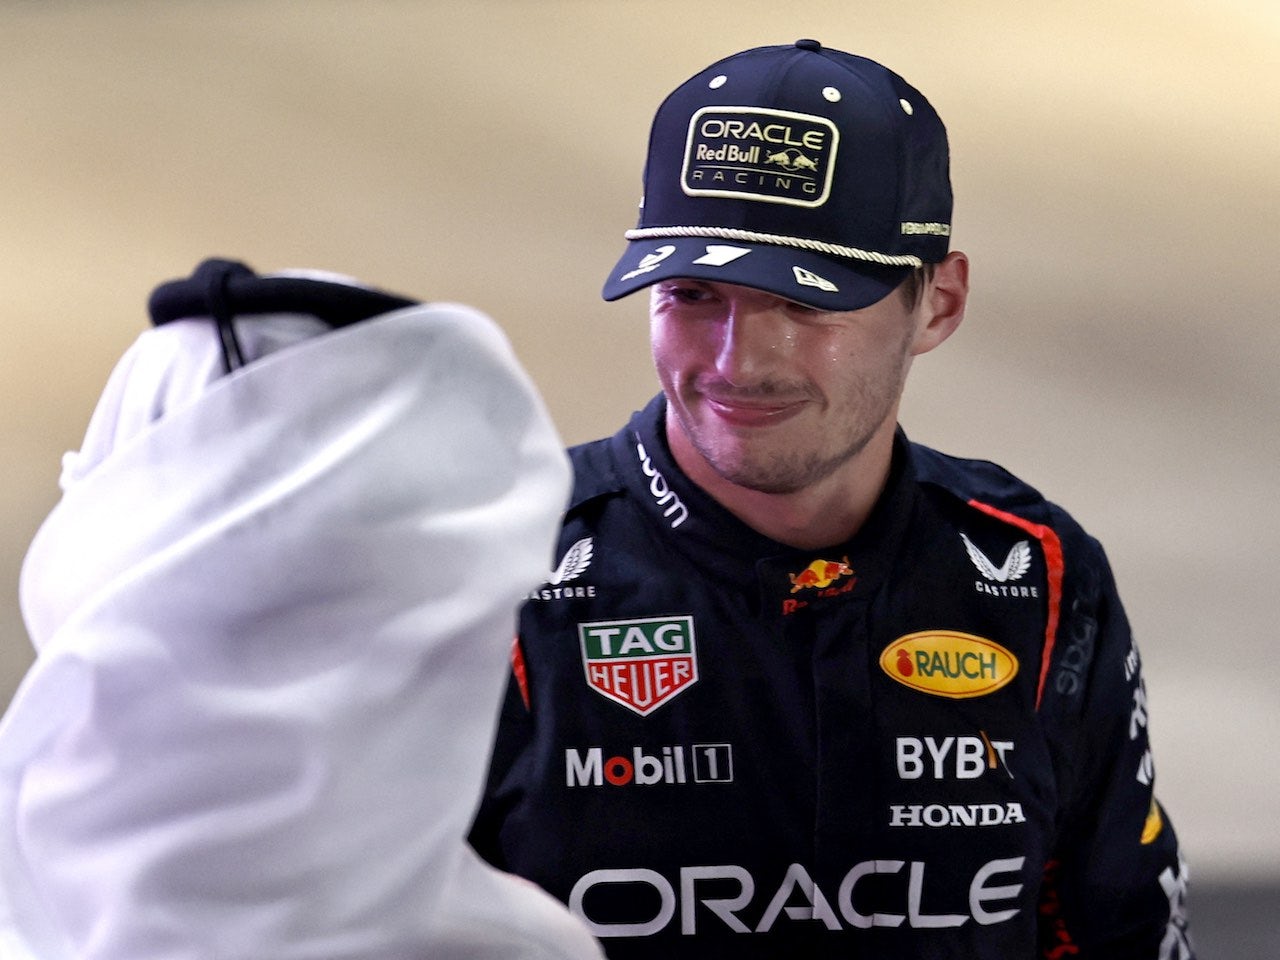 Verstappen will keep dominating for now - Prost